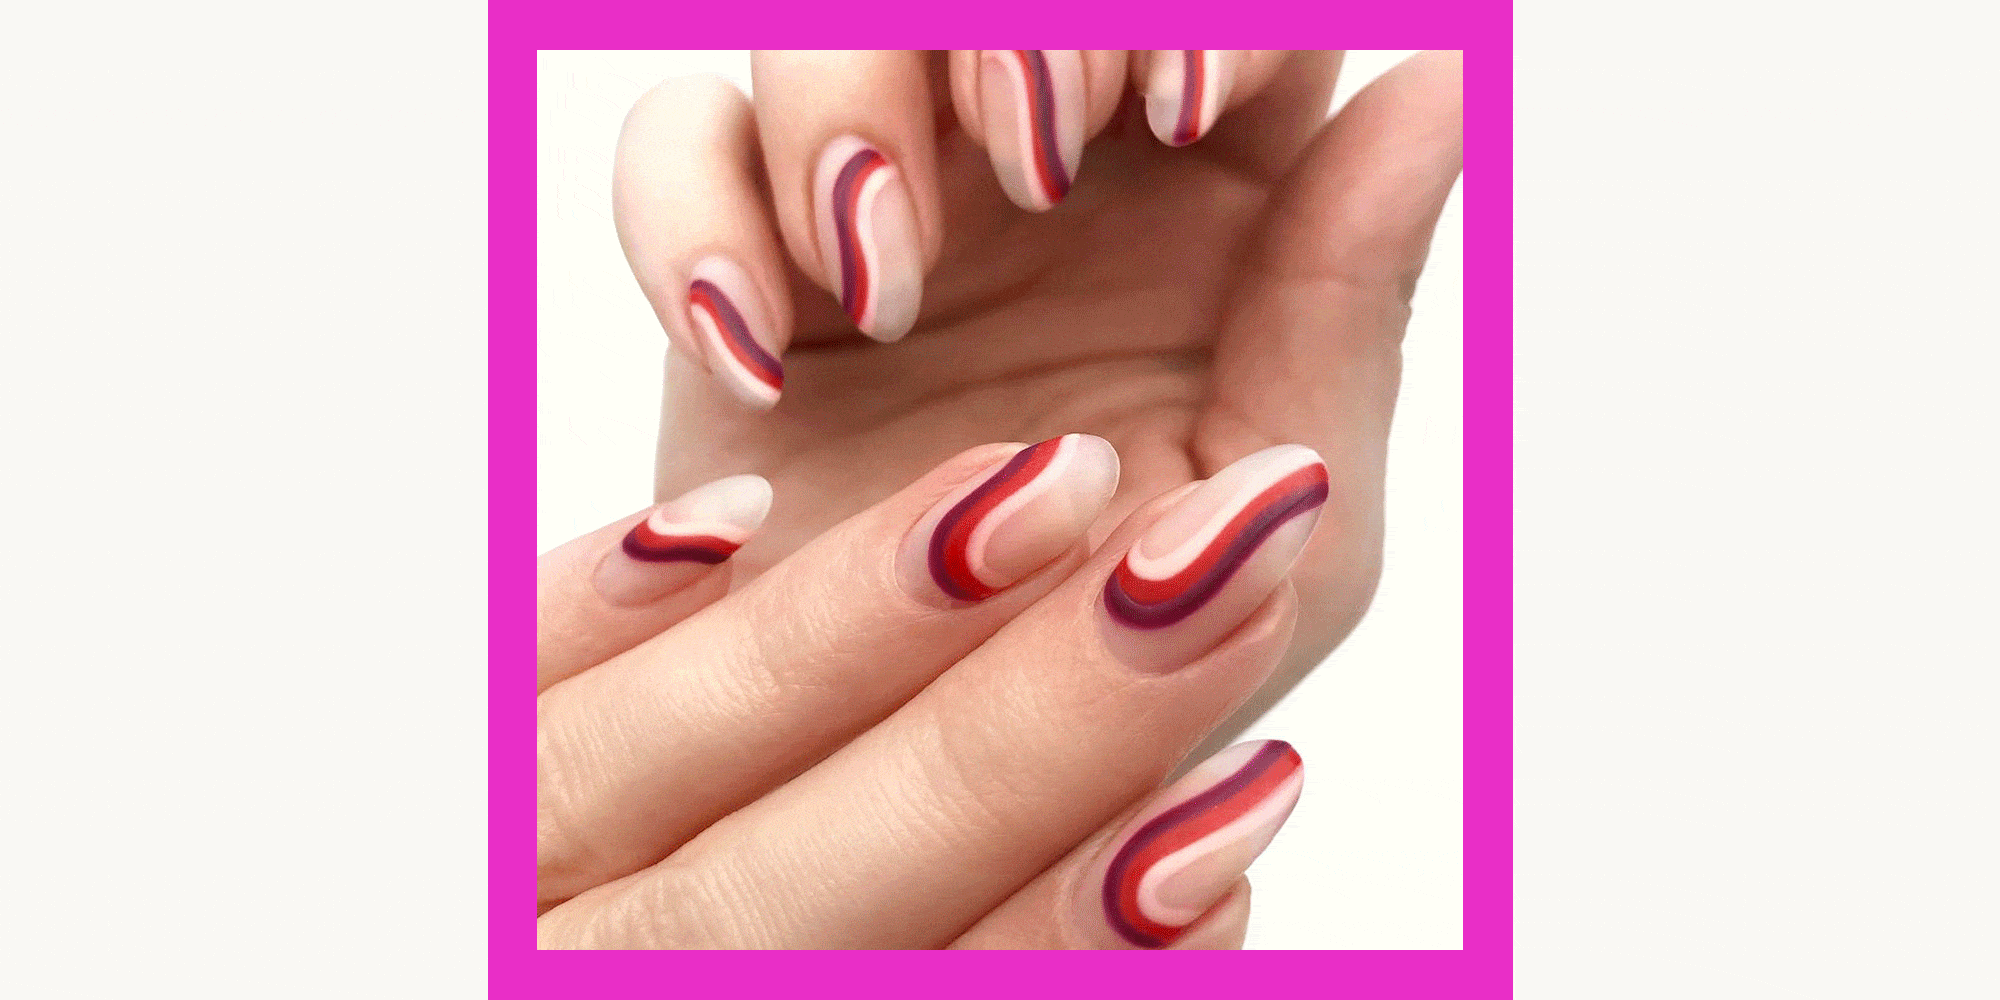 10. 15 Must-Try Chevron Nail Art Designs for Any Occasion - wide 10